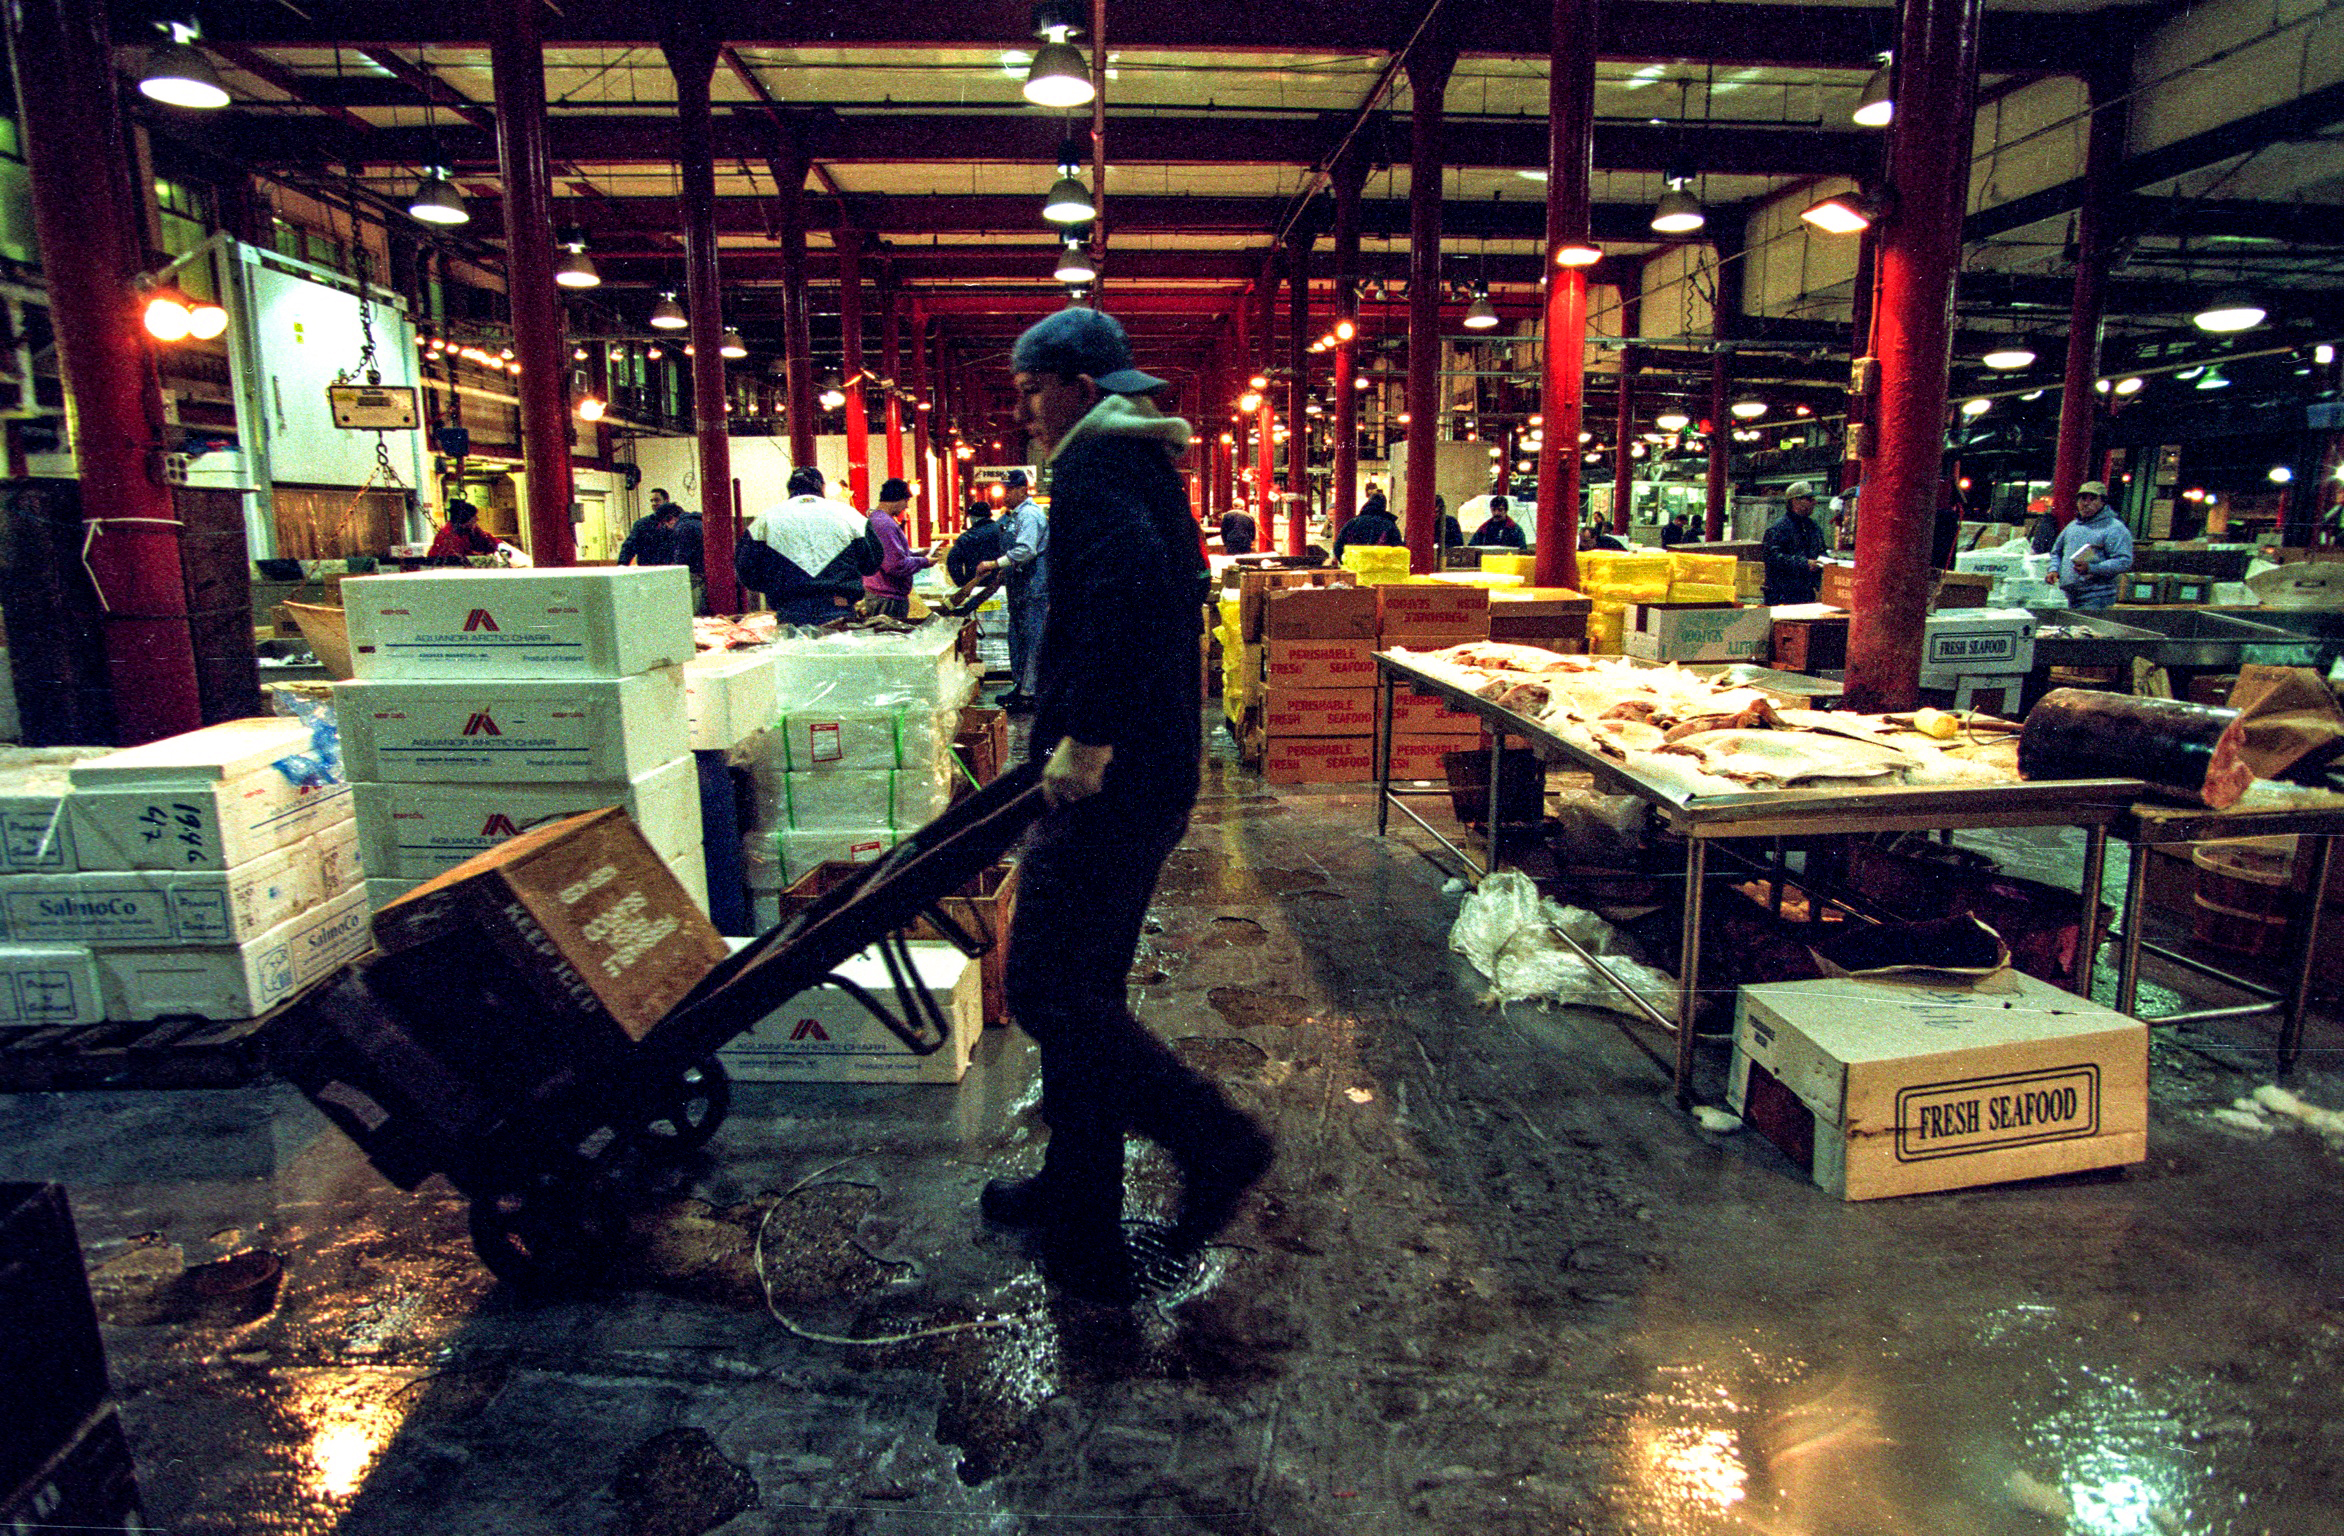 PHOTO: Early morning scene at the former Fulton Fish Market in New York City.